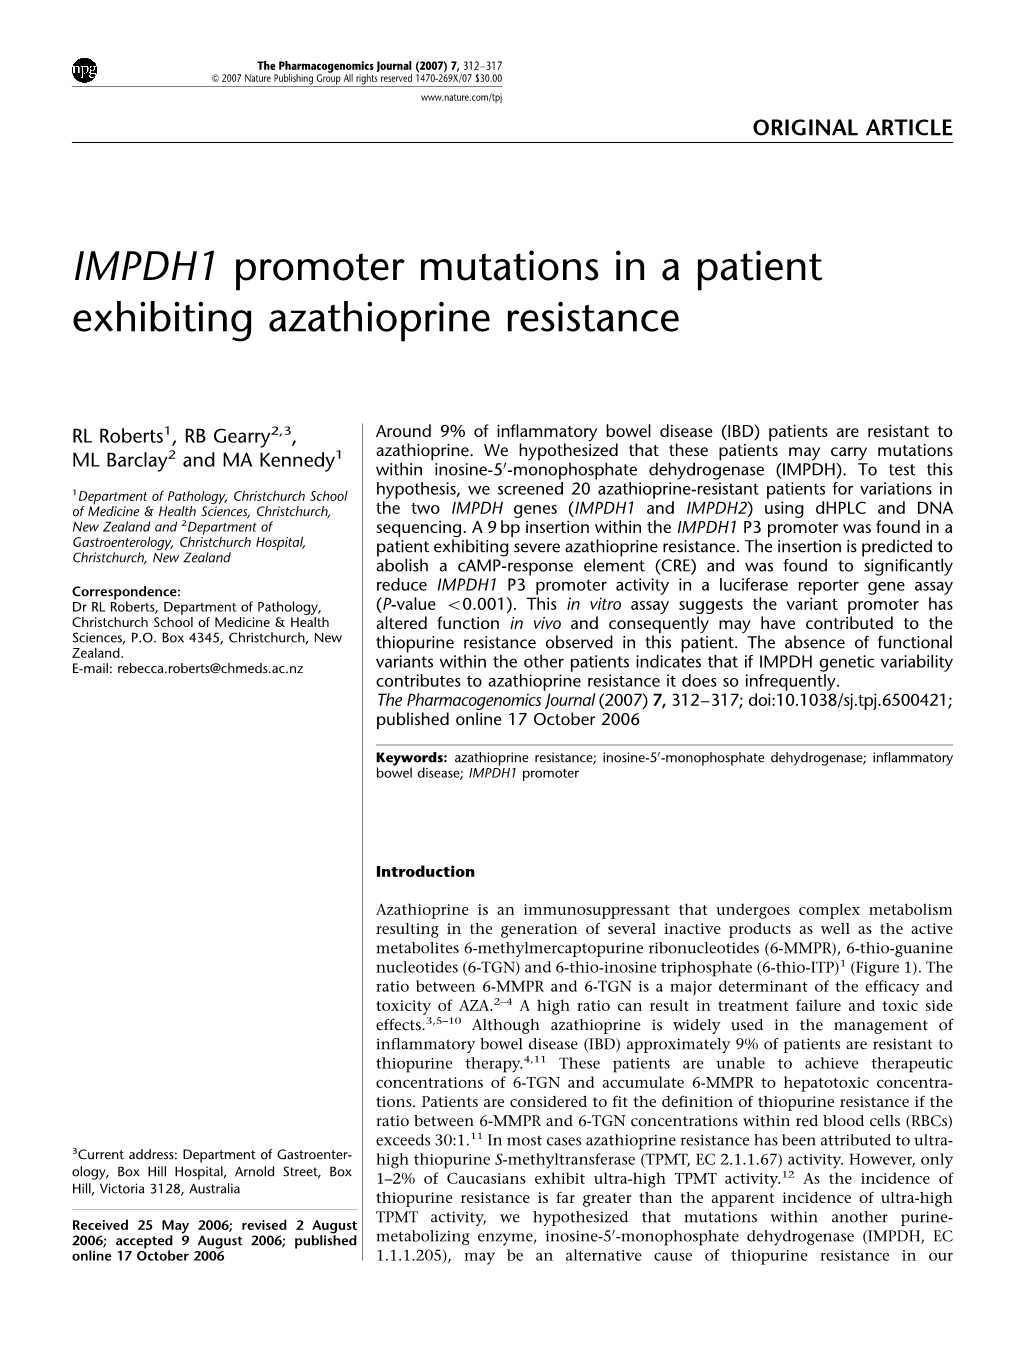 IMPDH1 Promoter Mutations in a Patient Exhibiting Azathioprine Resistance